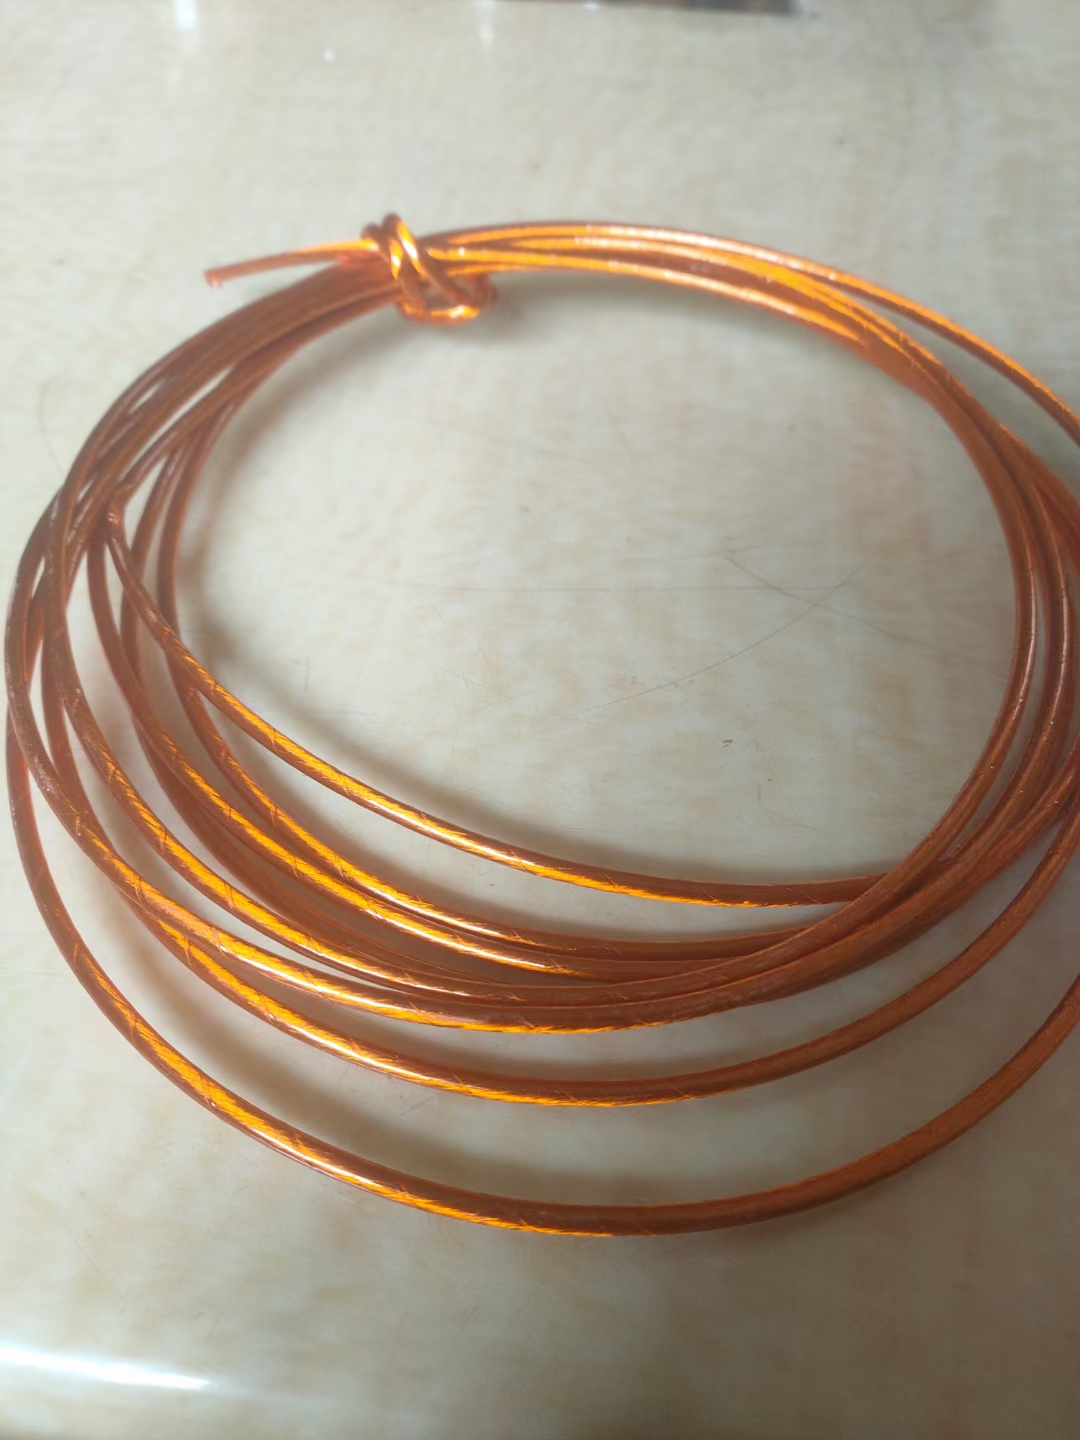 Cryogenic WIRE Cable,Low temperature -272 cable,  -192 Cryogenic Cable,-272 Cryogenic Cable,cryogenic liquid Cable